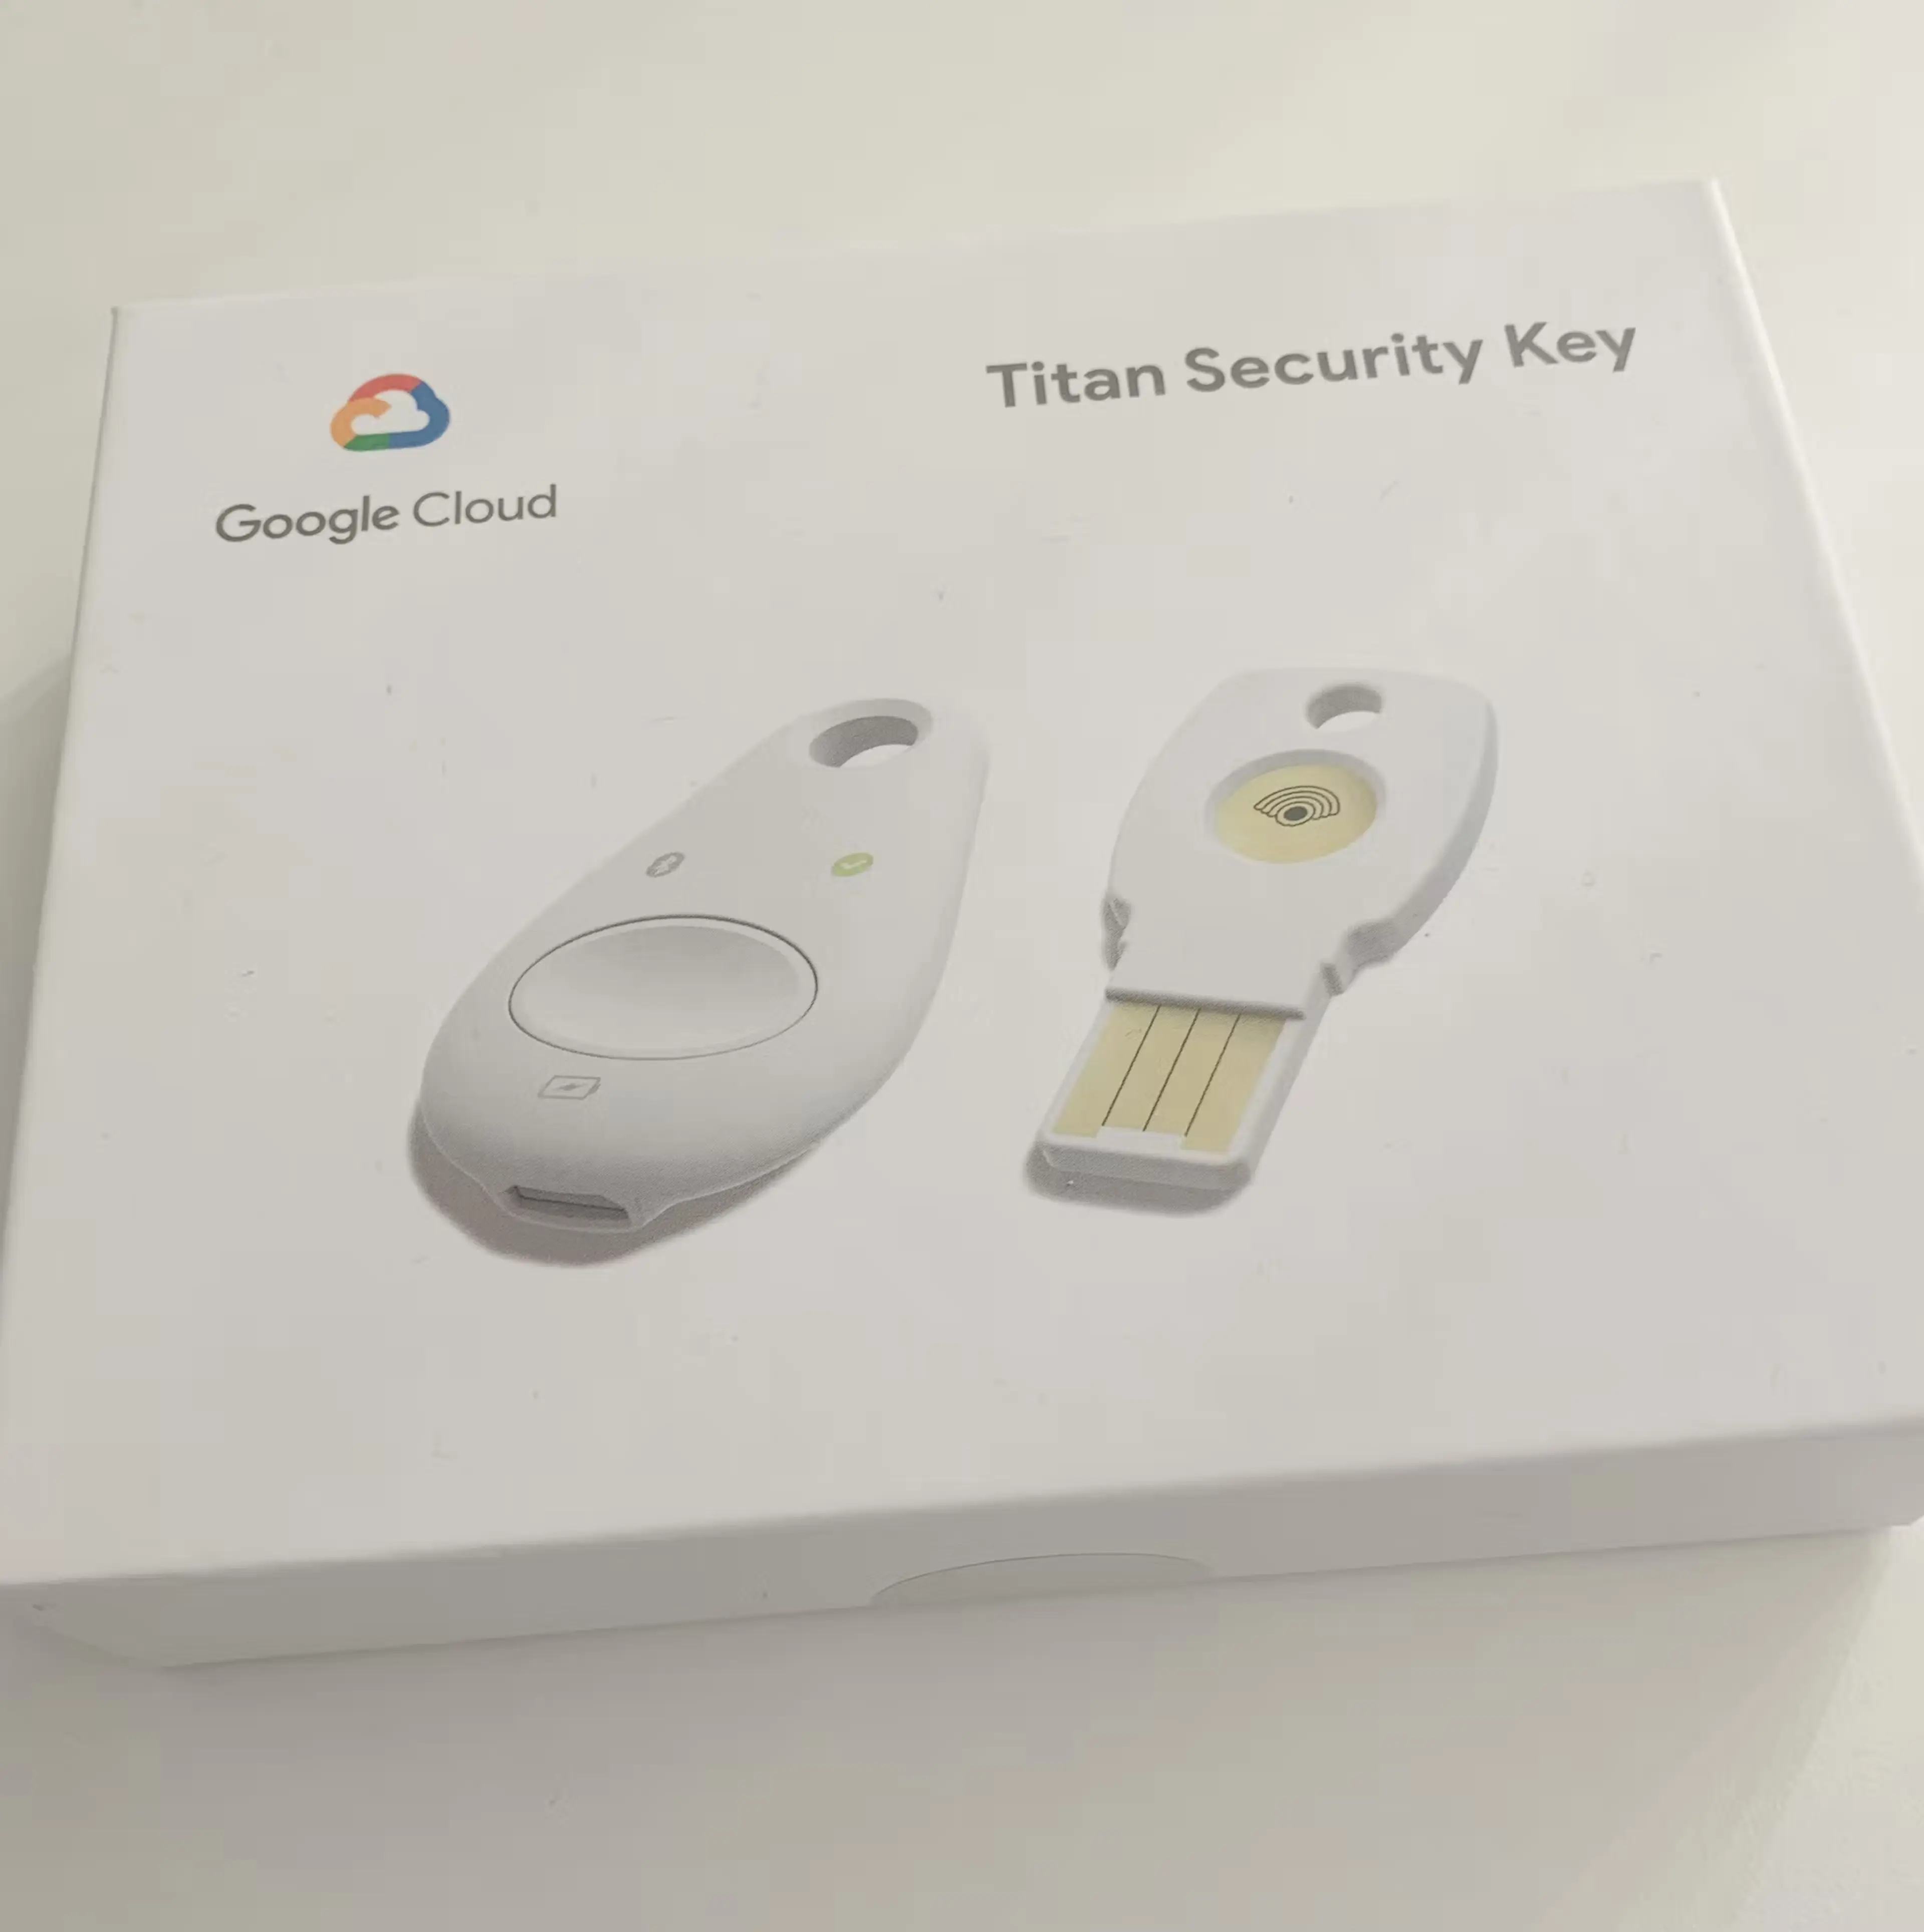 The box of the Titan Security Keys by Google